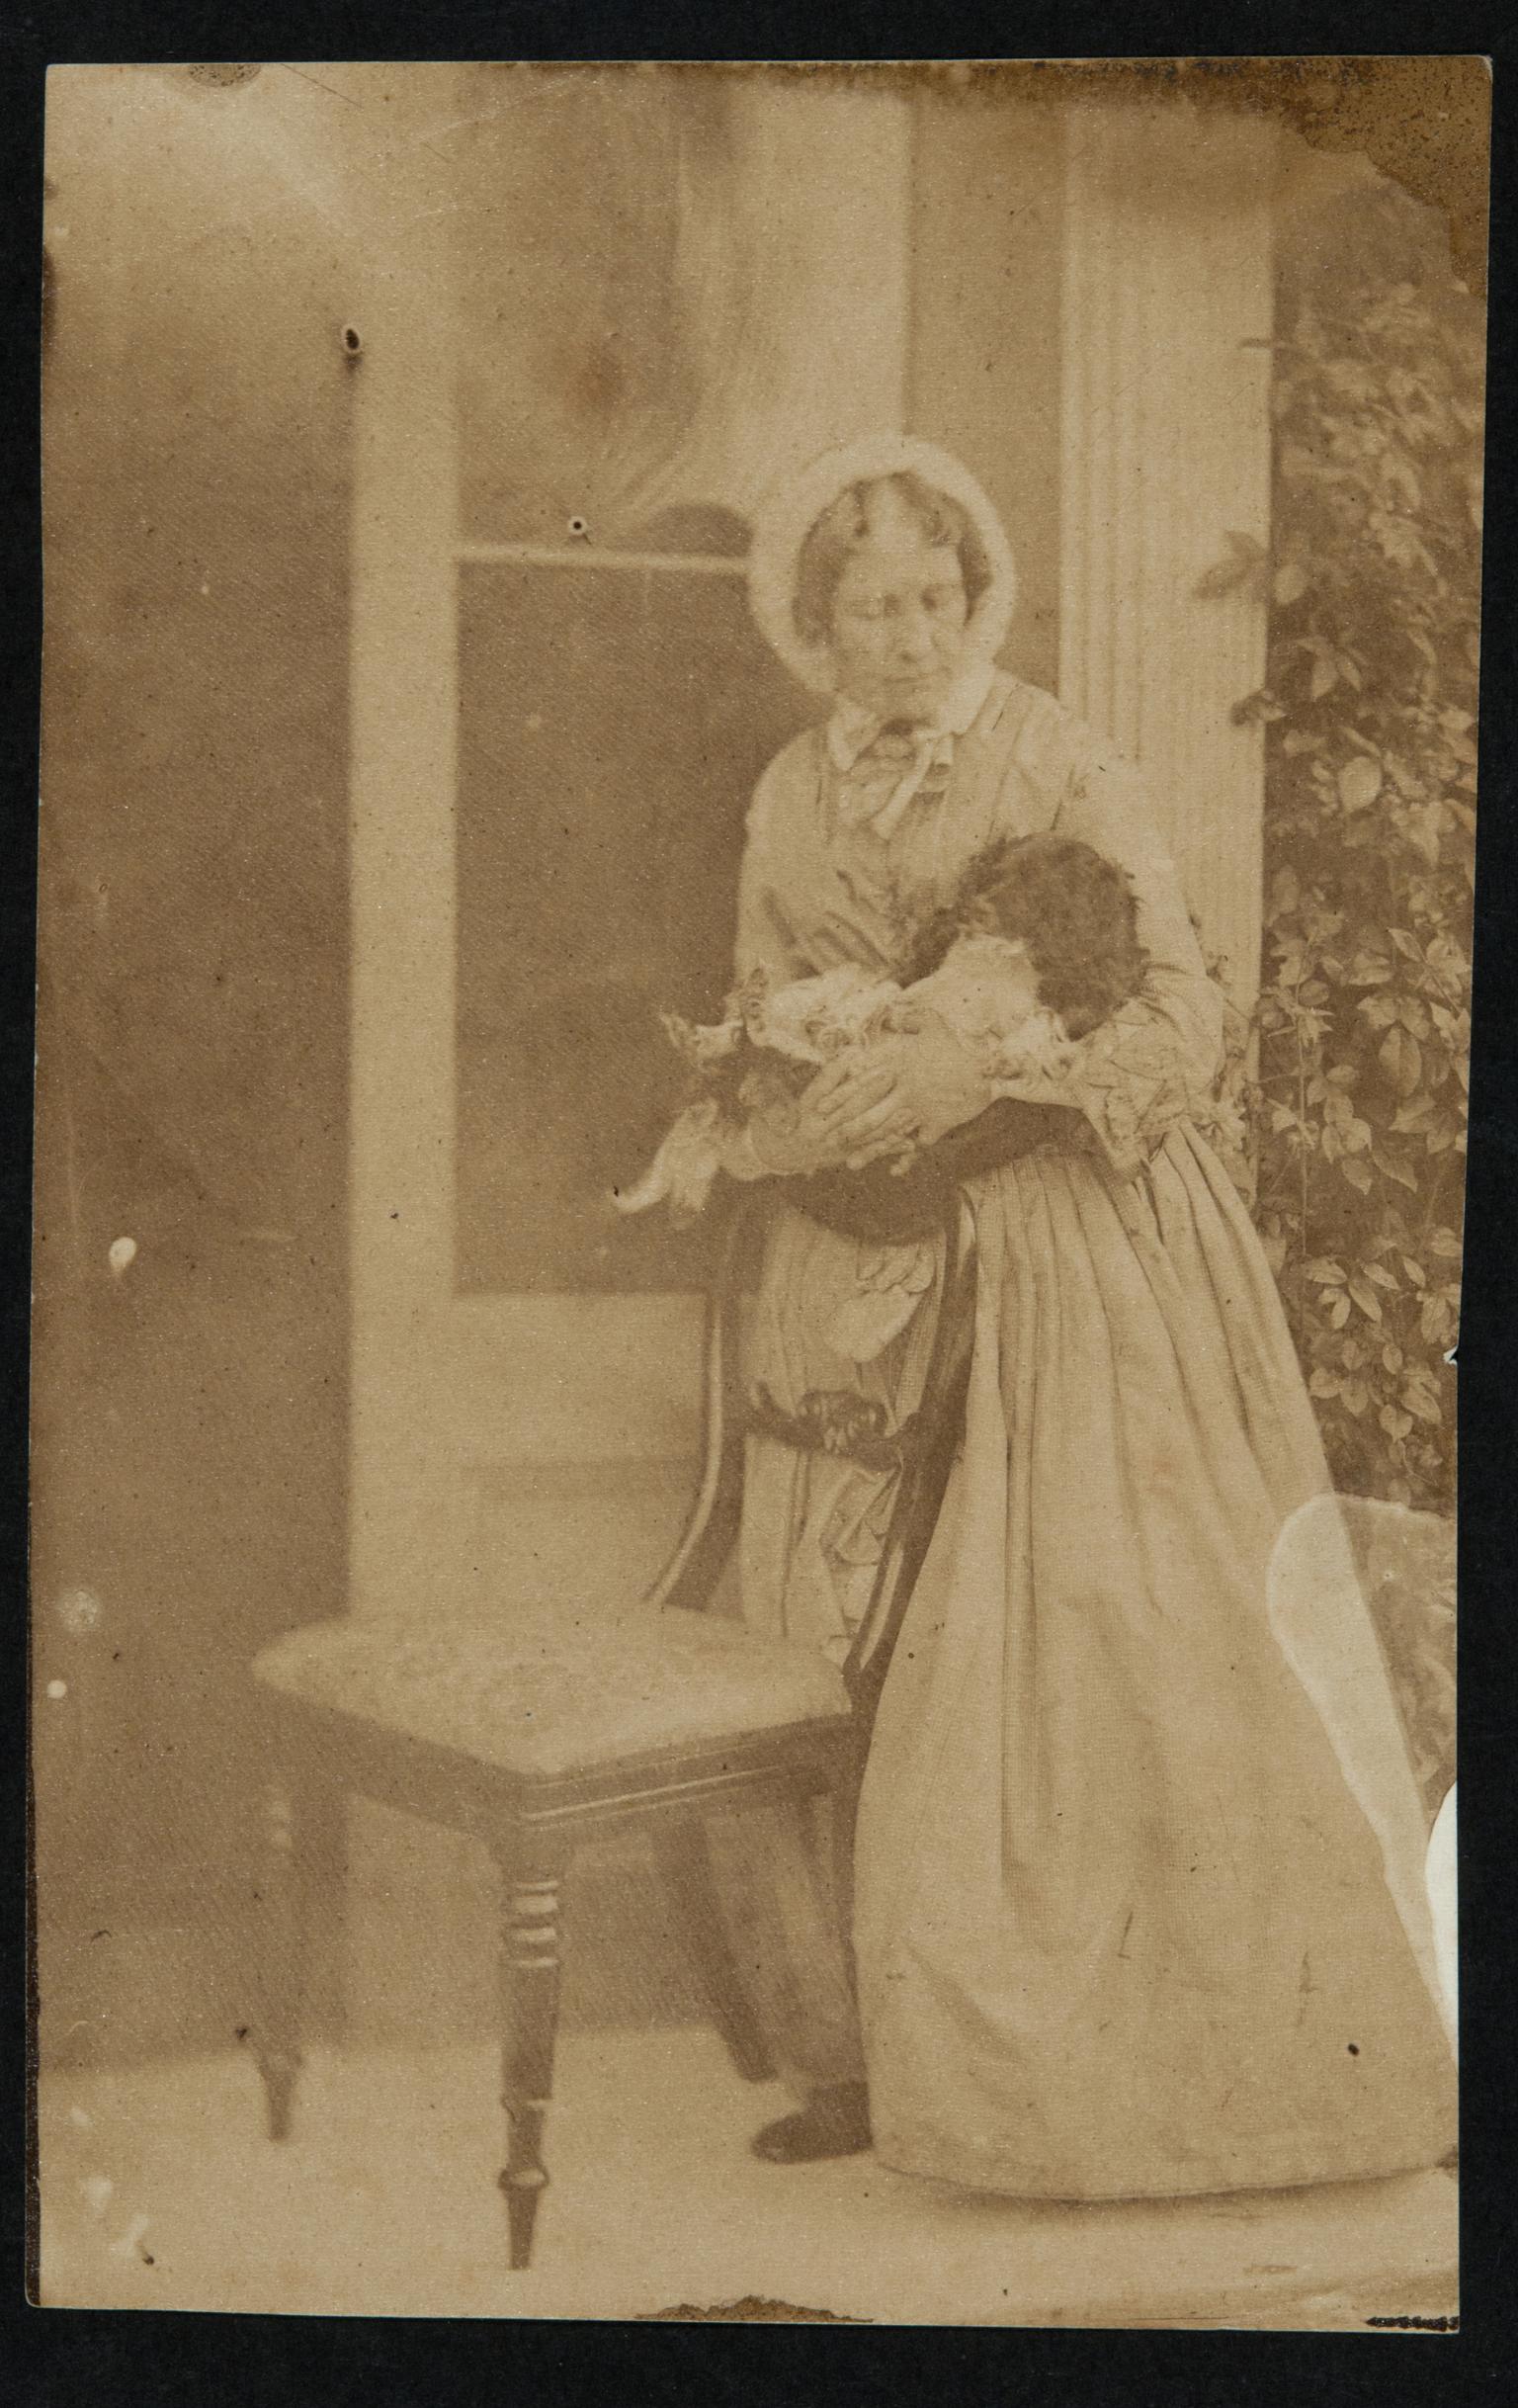 Lady with a dog, photograph